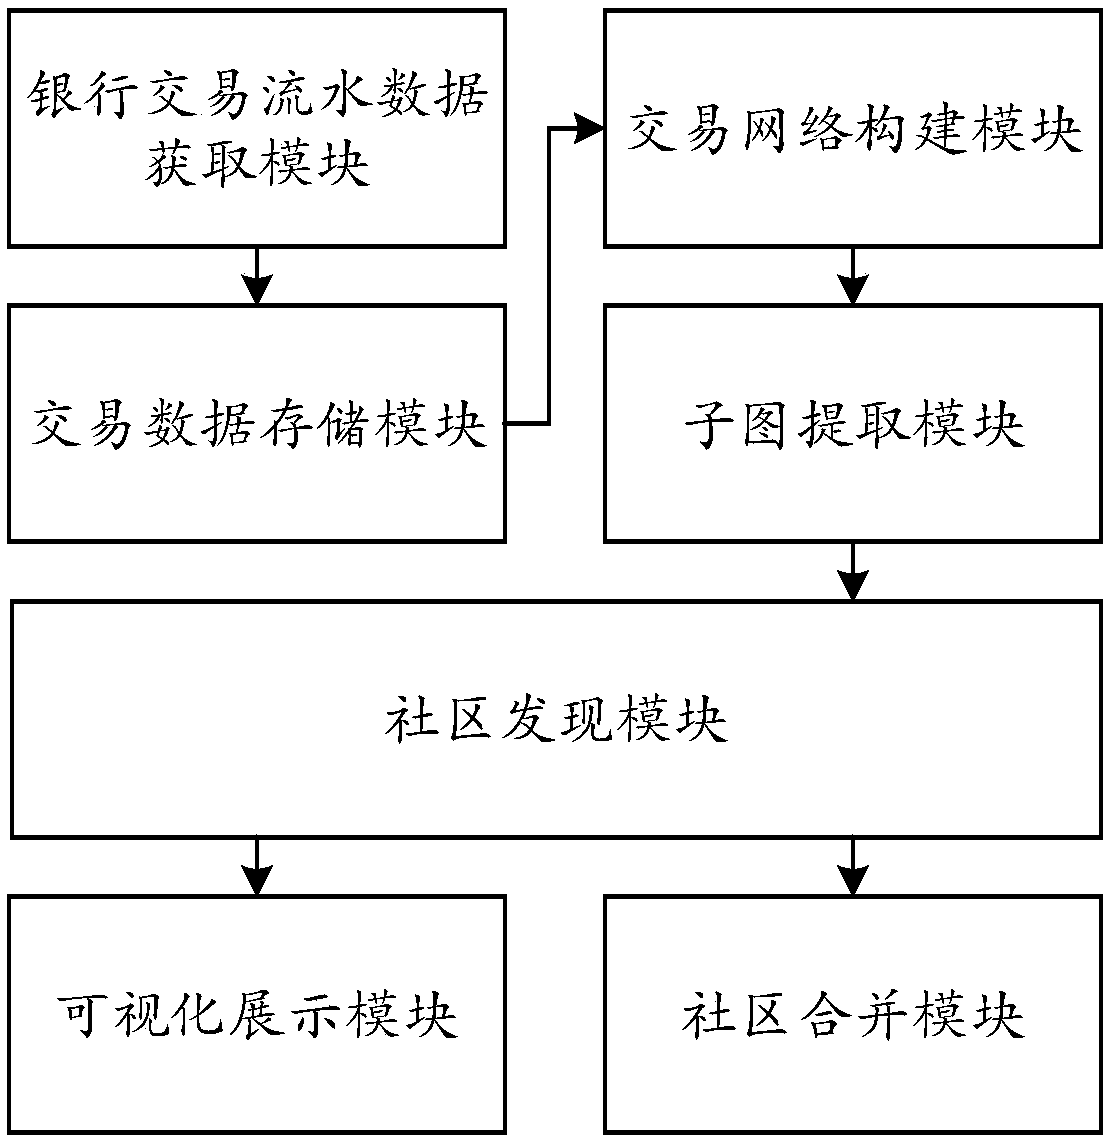 A bank transaction group discovery method and system based on an overlapping community discovery algorithm